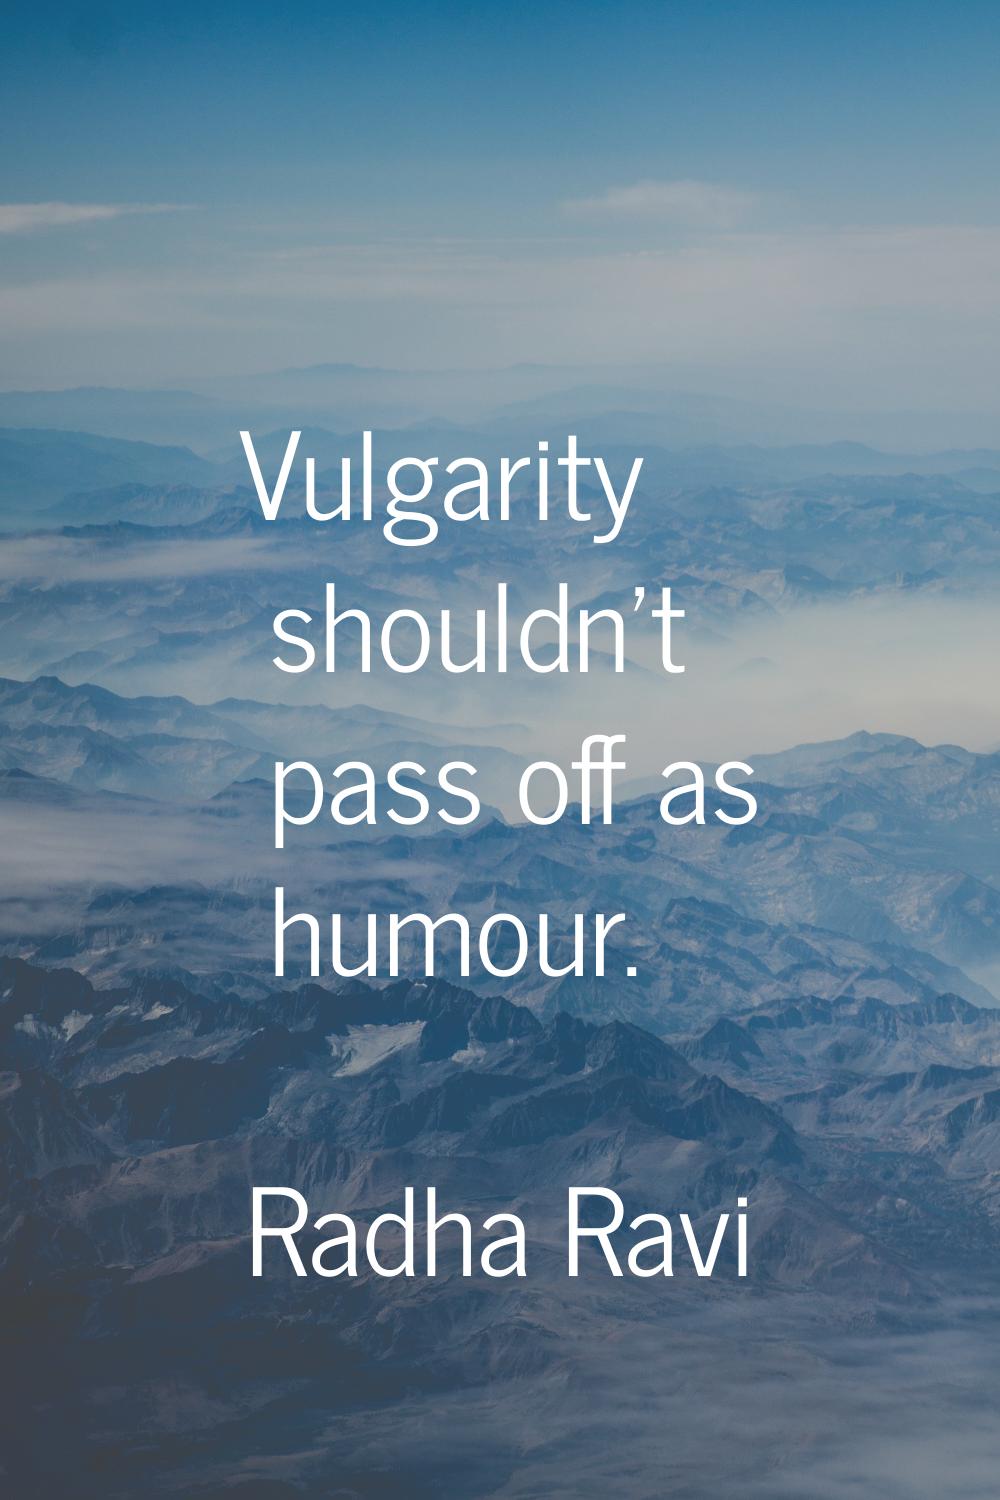 Vulgarity shouldn't pass off as humour.